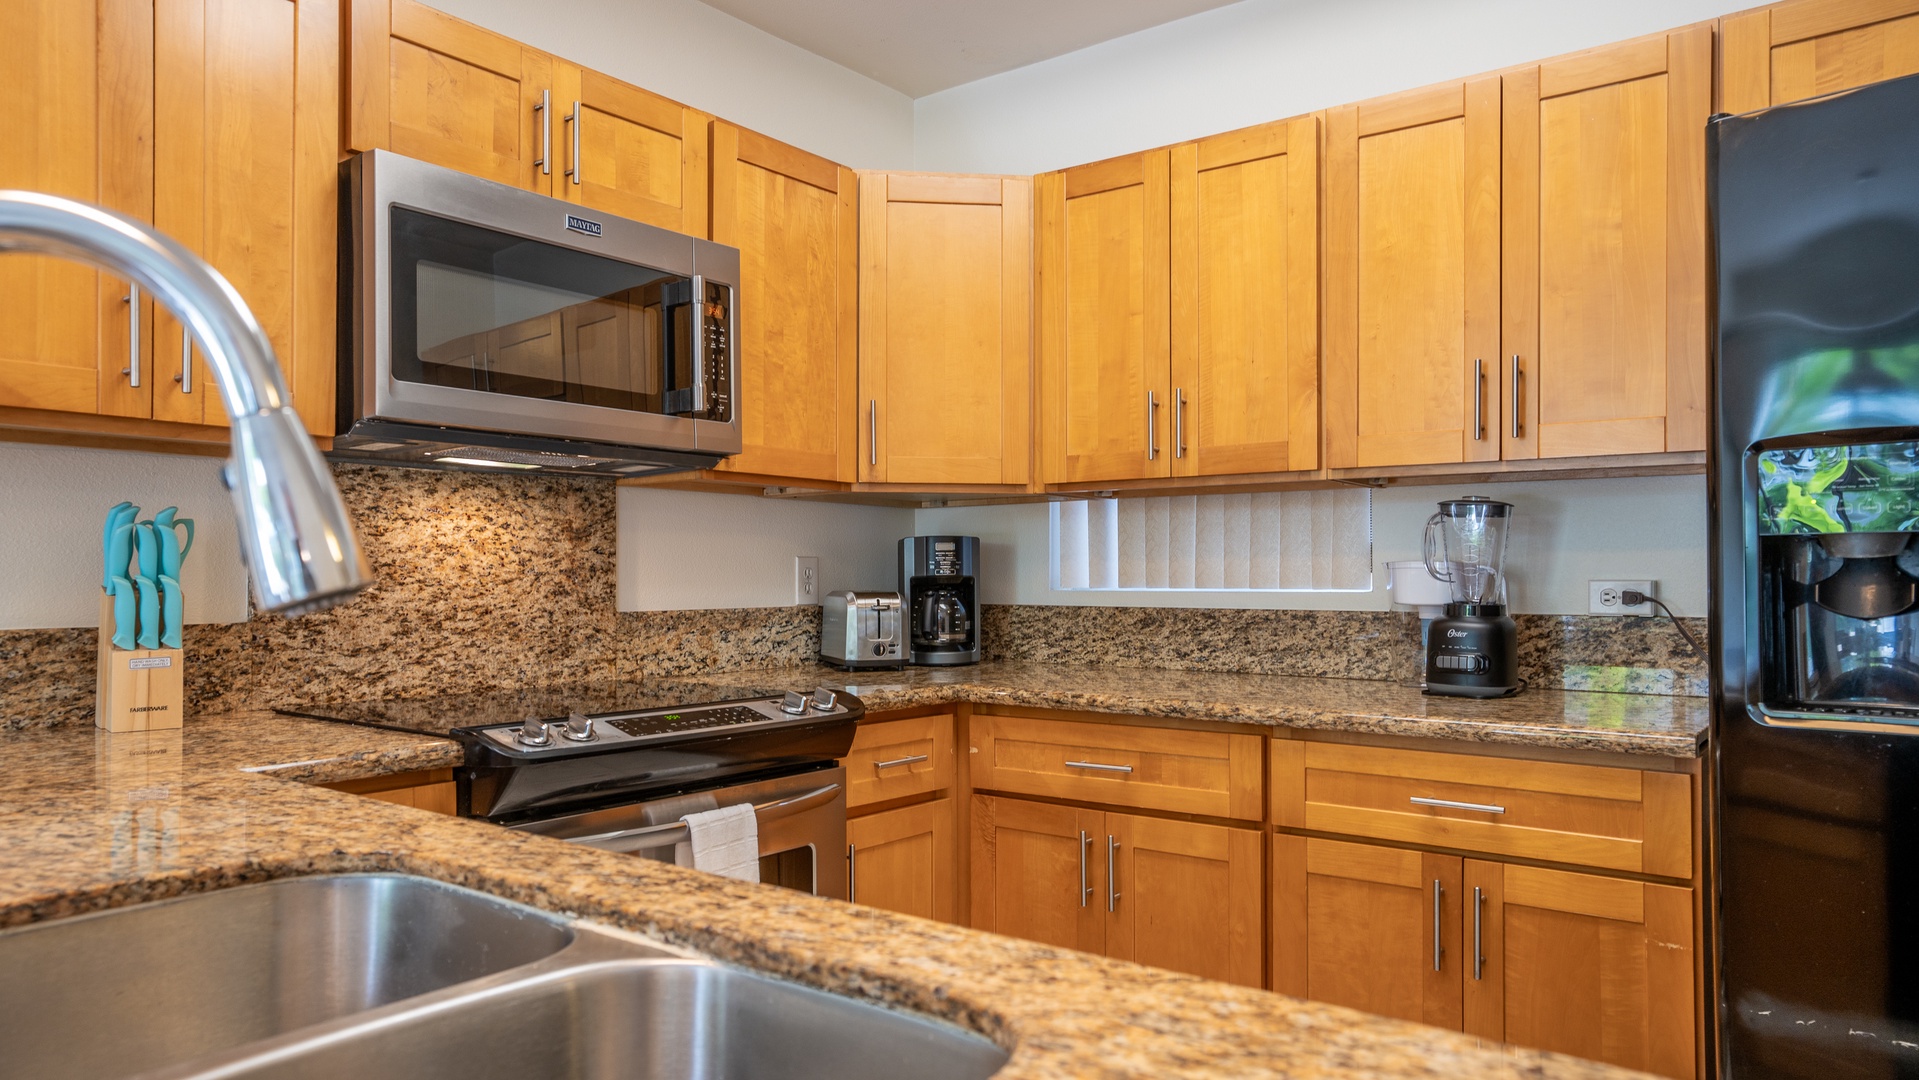 Kapolei Vacation Rentals, Fairways at Ko Olina 27H - The kitchen, living room and dining room are all in an open floor plan.